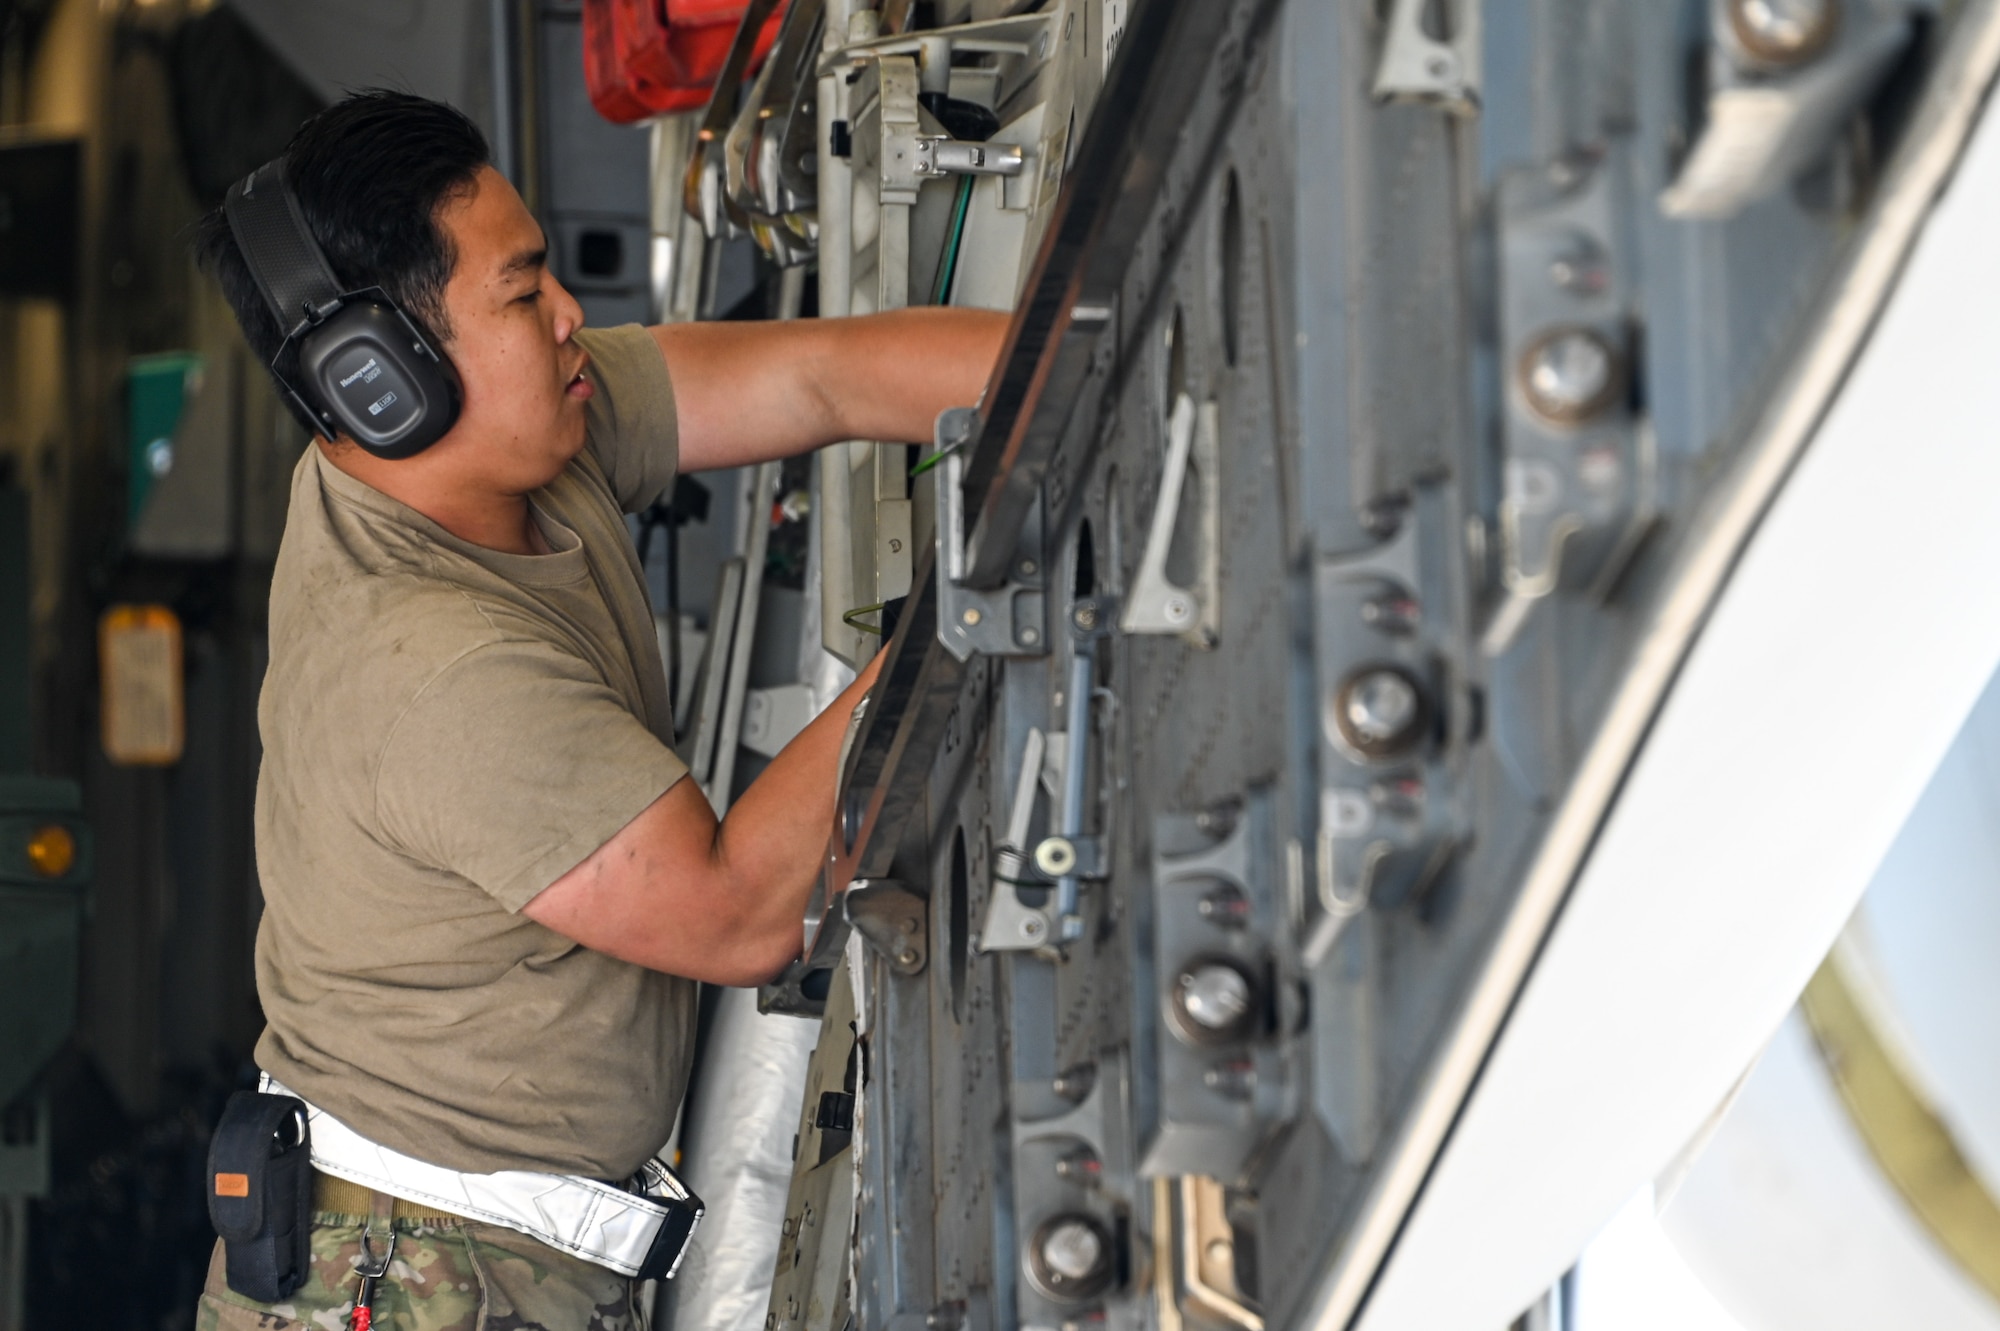 U.S. Air Force Senior Airman Kevin Lim, 97th Logistics Readiness Squadron (LRS) unilateral aircrew training element member, places equipment on the cargo loading wall of a C-17 Globemaster III at Fort Smith Arkansas, June 14, 2023. Two members from the 97th LRS completed training and real-world exercises during the joint-operation. (U.S. Air Force photo by Senior Airman Kayla Christenson)